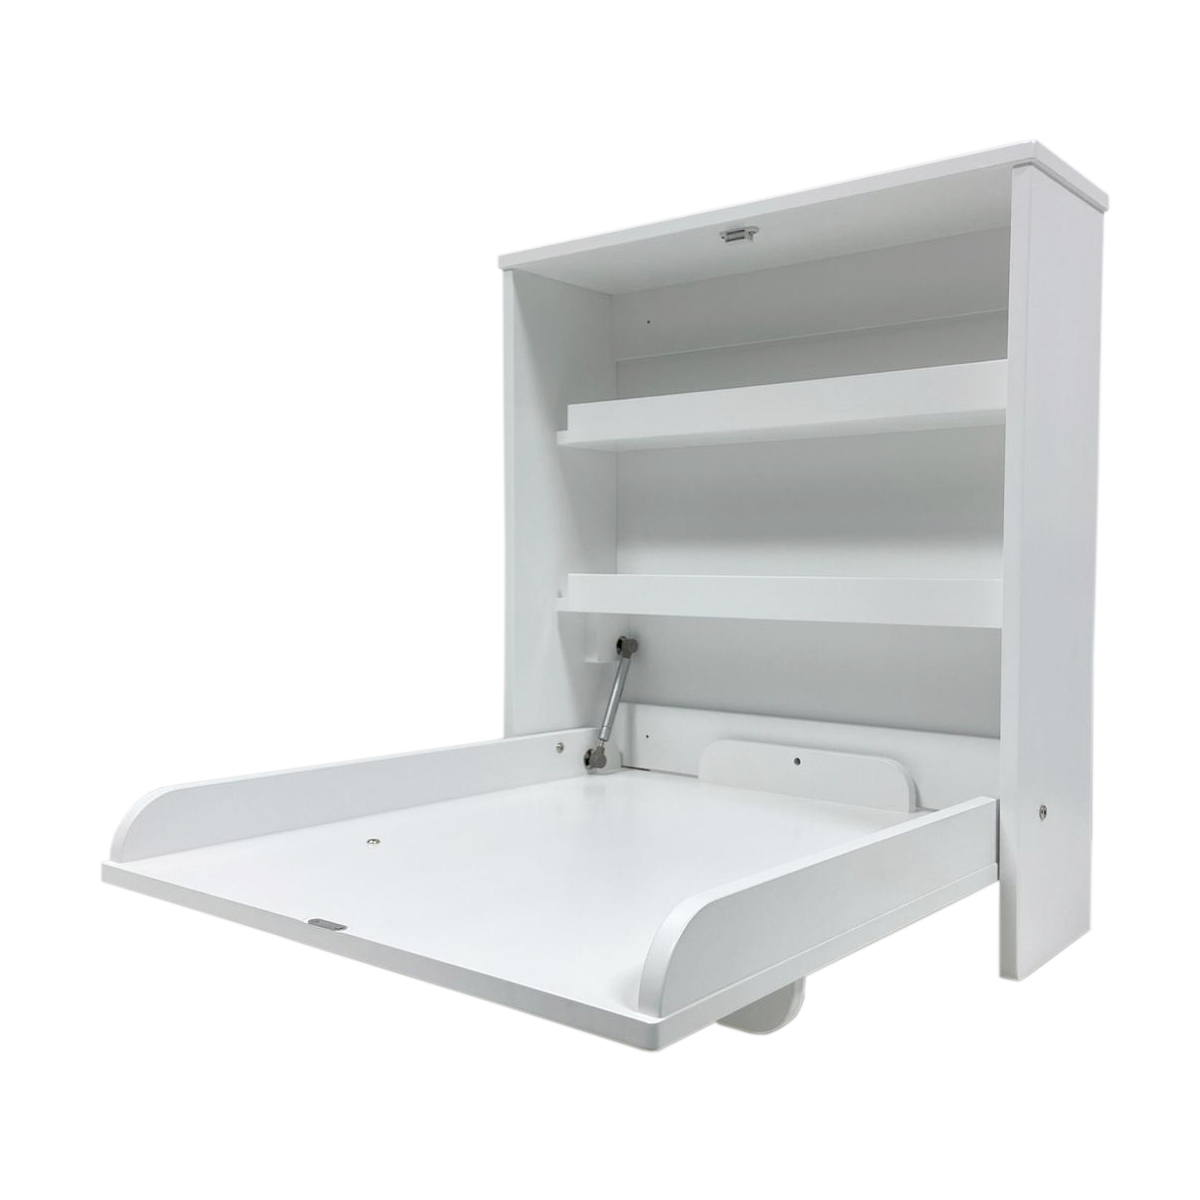 Changing table wall-mounted, White